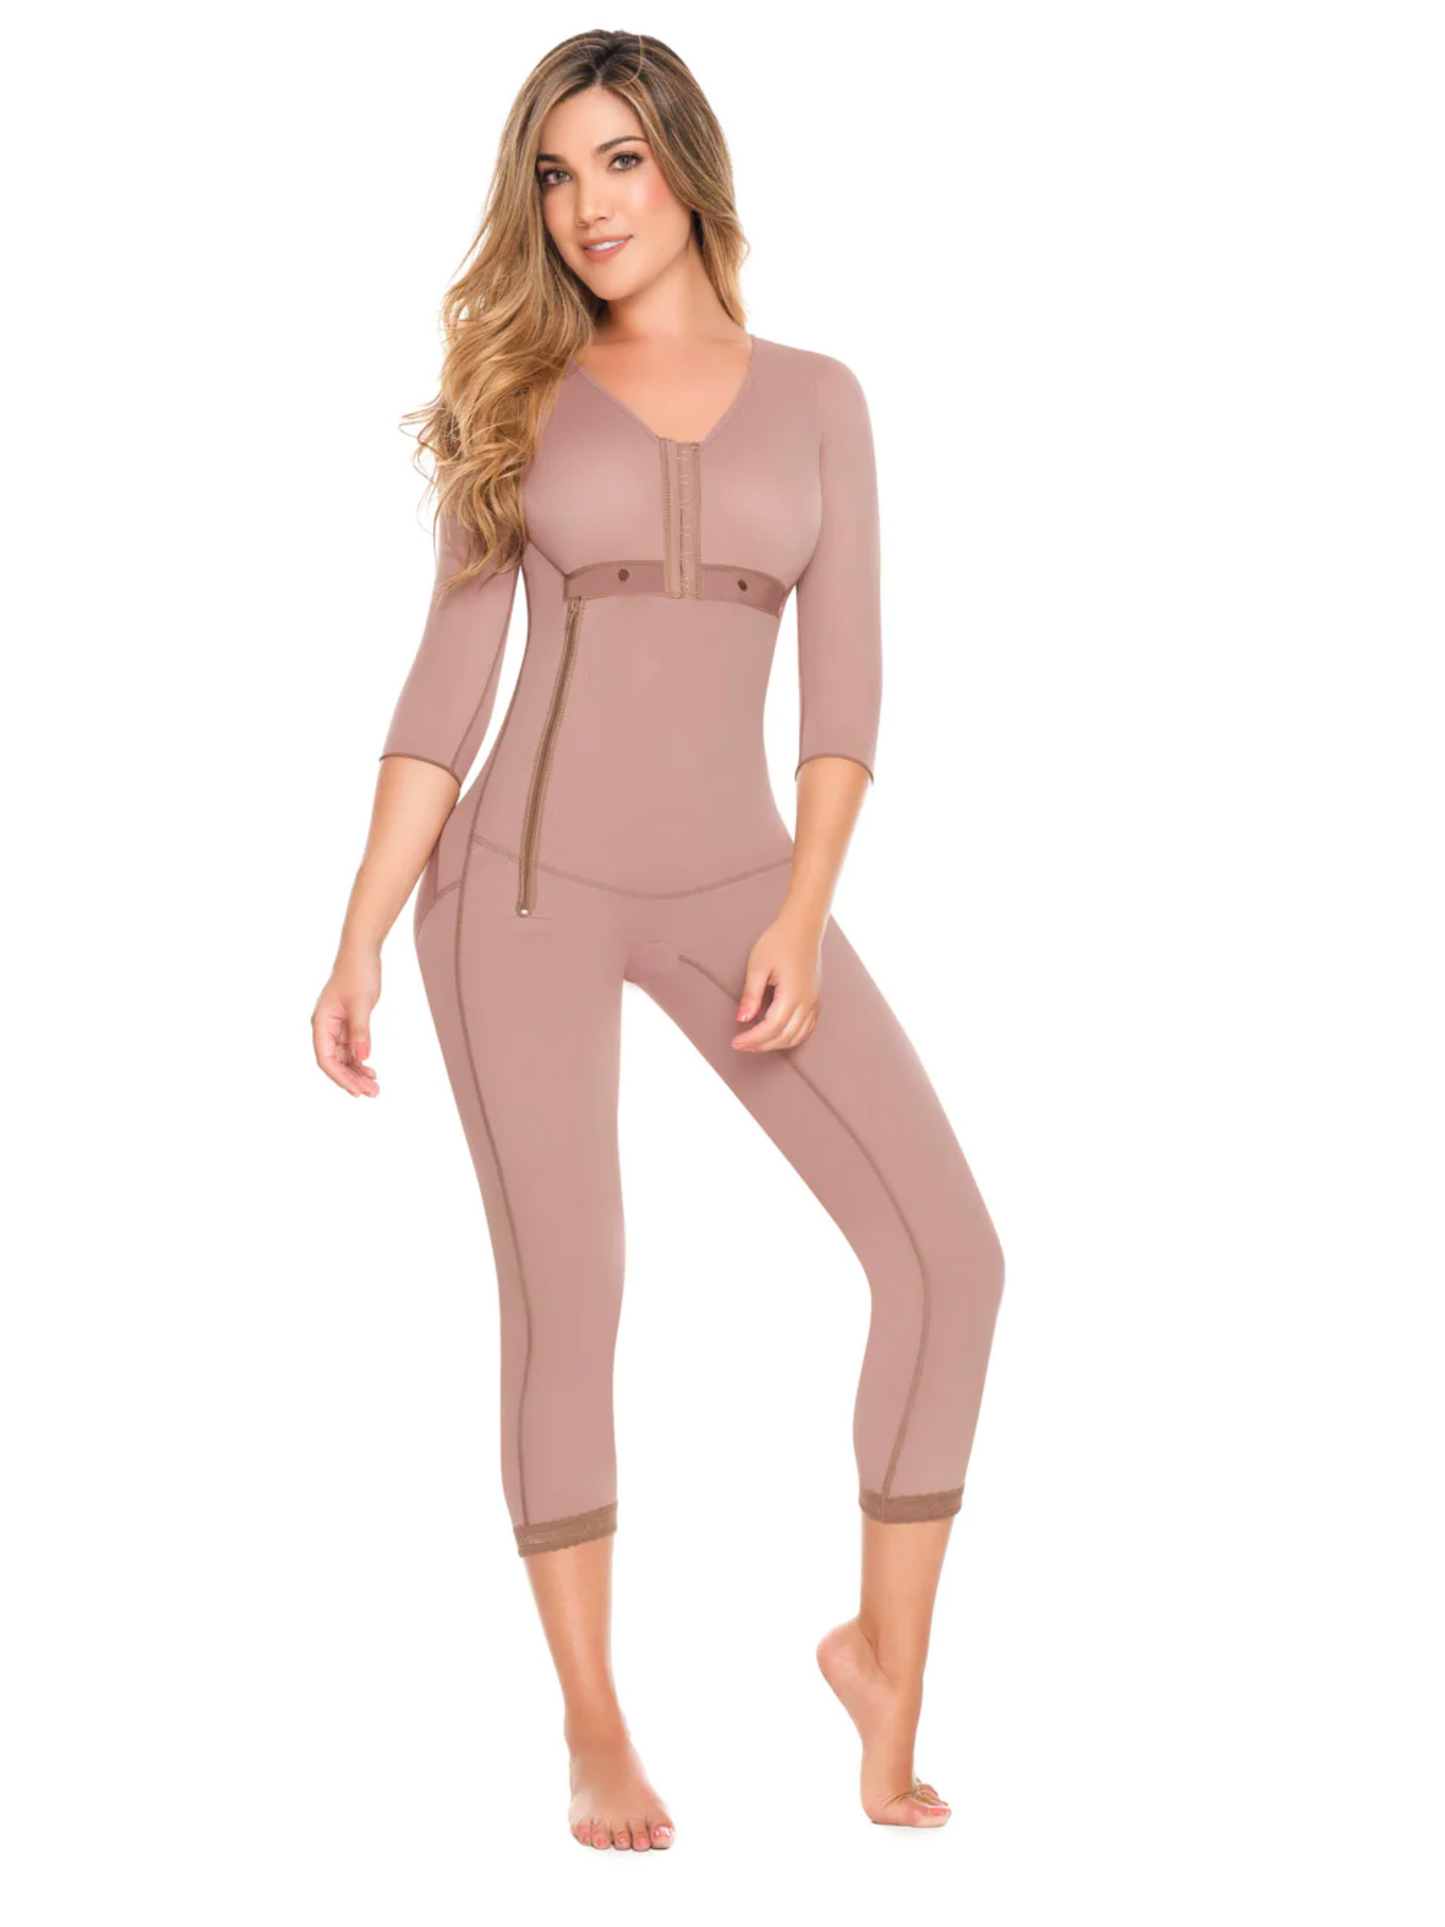 Long Sleeve Ankle-Length Size-Reducing & Post-Surgical Girdle : Delie by Fajate Ref  09036